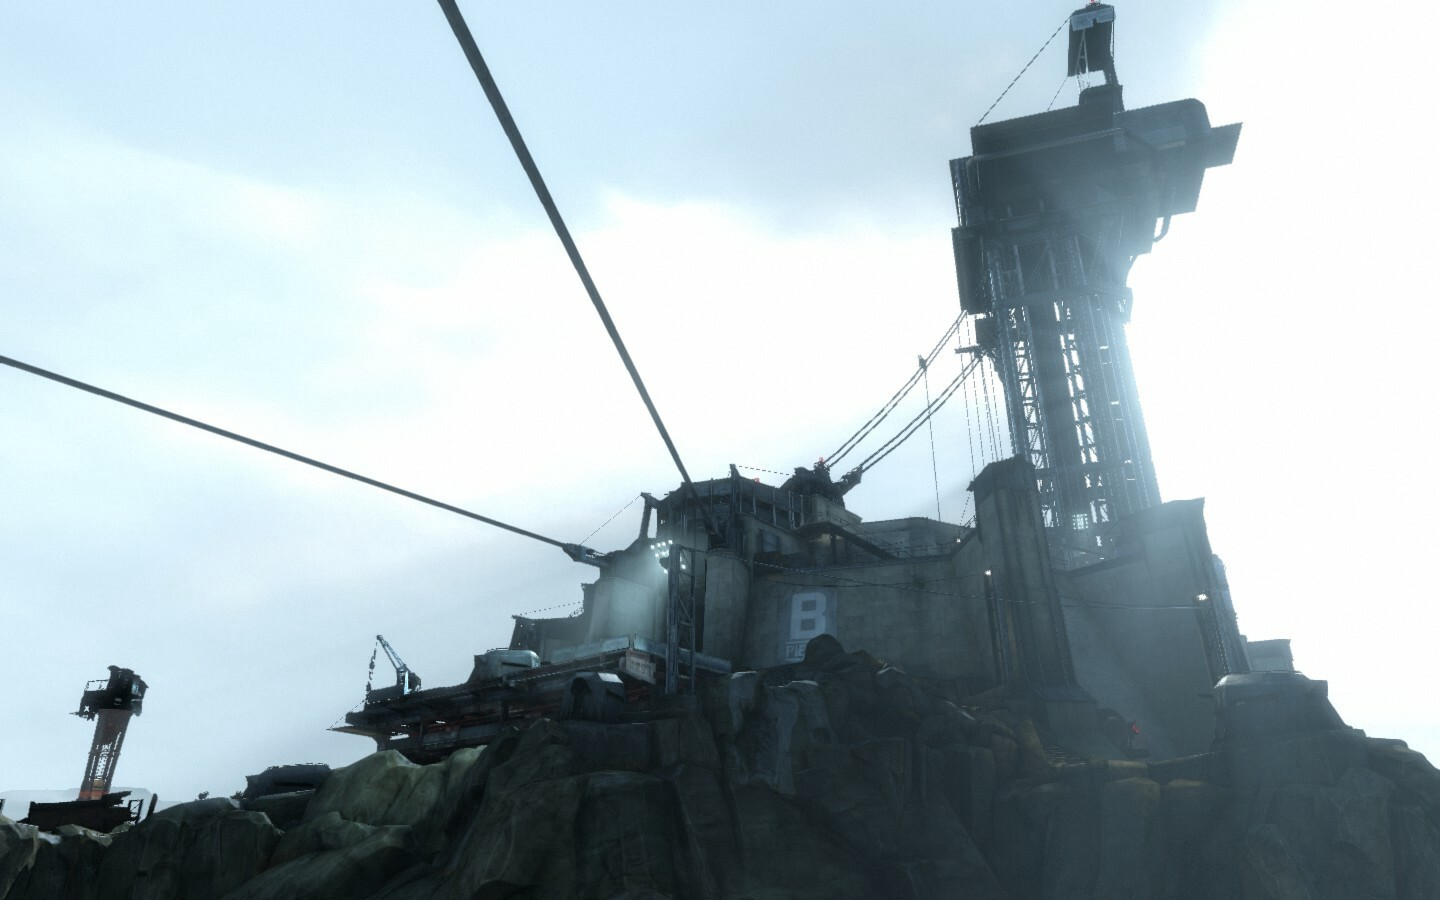 Screenshot from the game. Depicts a mountaintop facility covered in tethering cables.